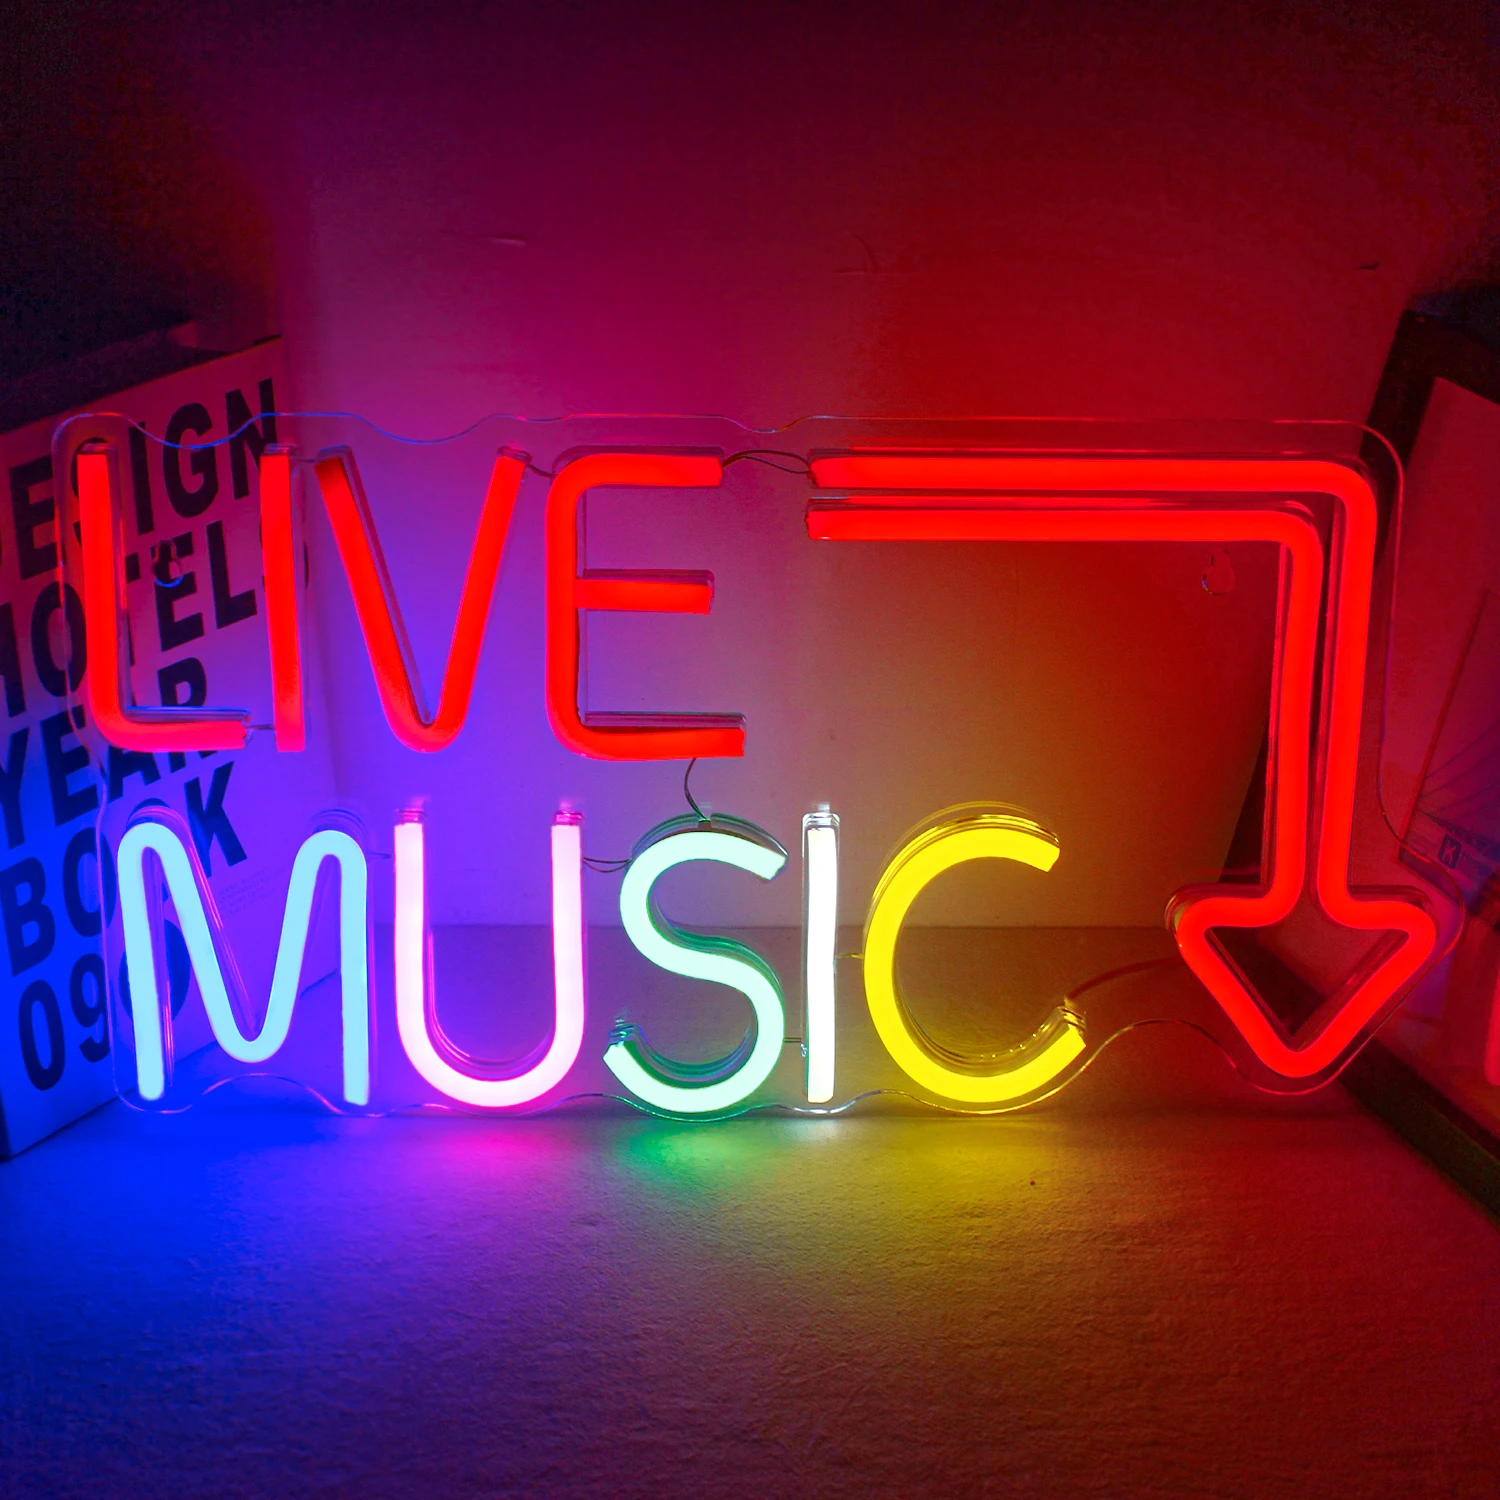 Live Music Neon Sign for Wall Decor Colorful Music Studio Party Neon Music Studio USB Powered Switch Light up Sign for Beer Bar guitar neon sign art guitar decor neon lights music studio bar party club led light up sign gift for music lover girl boy neon